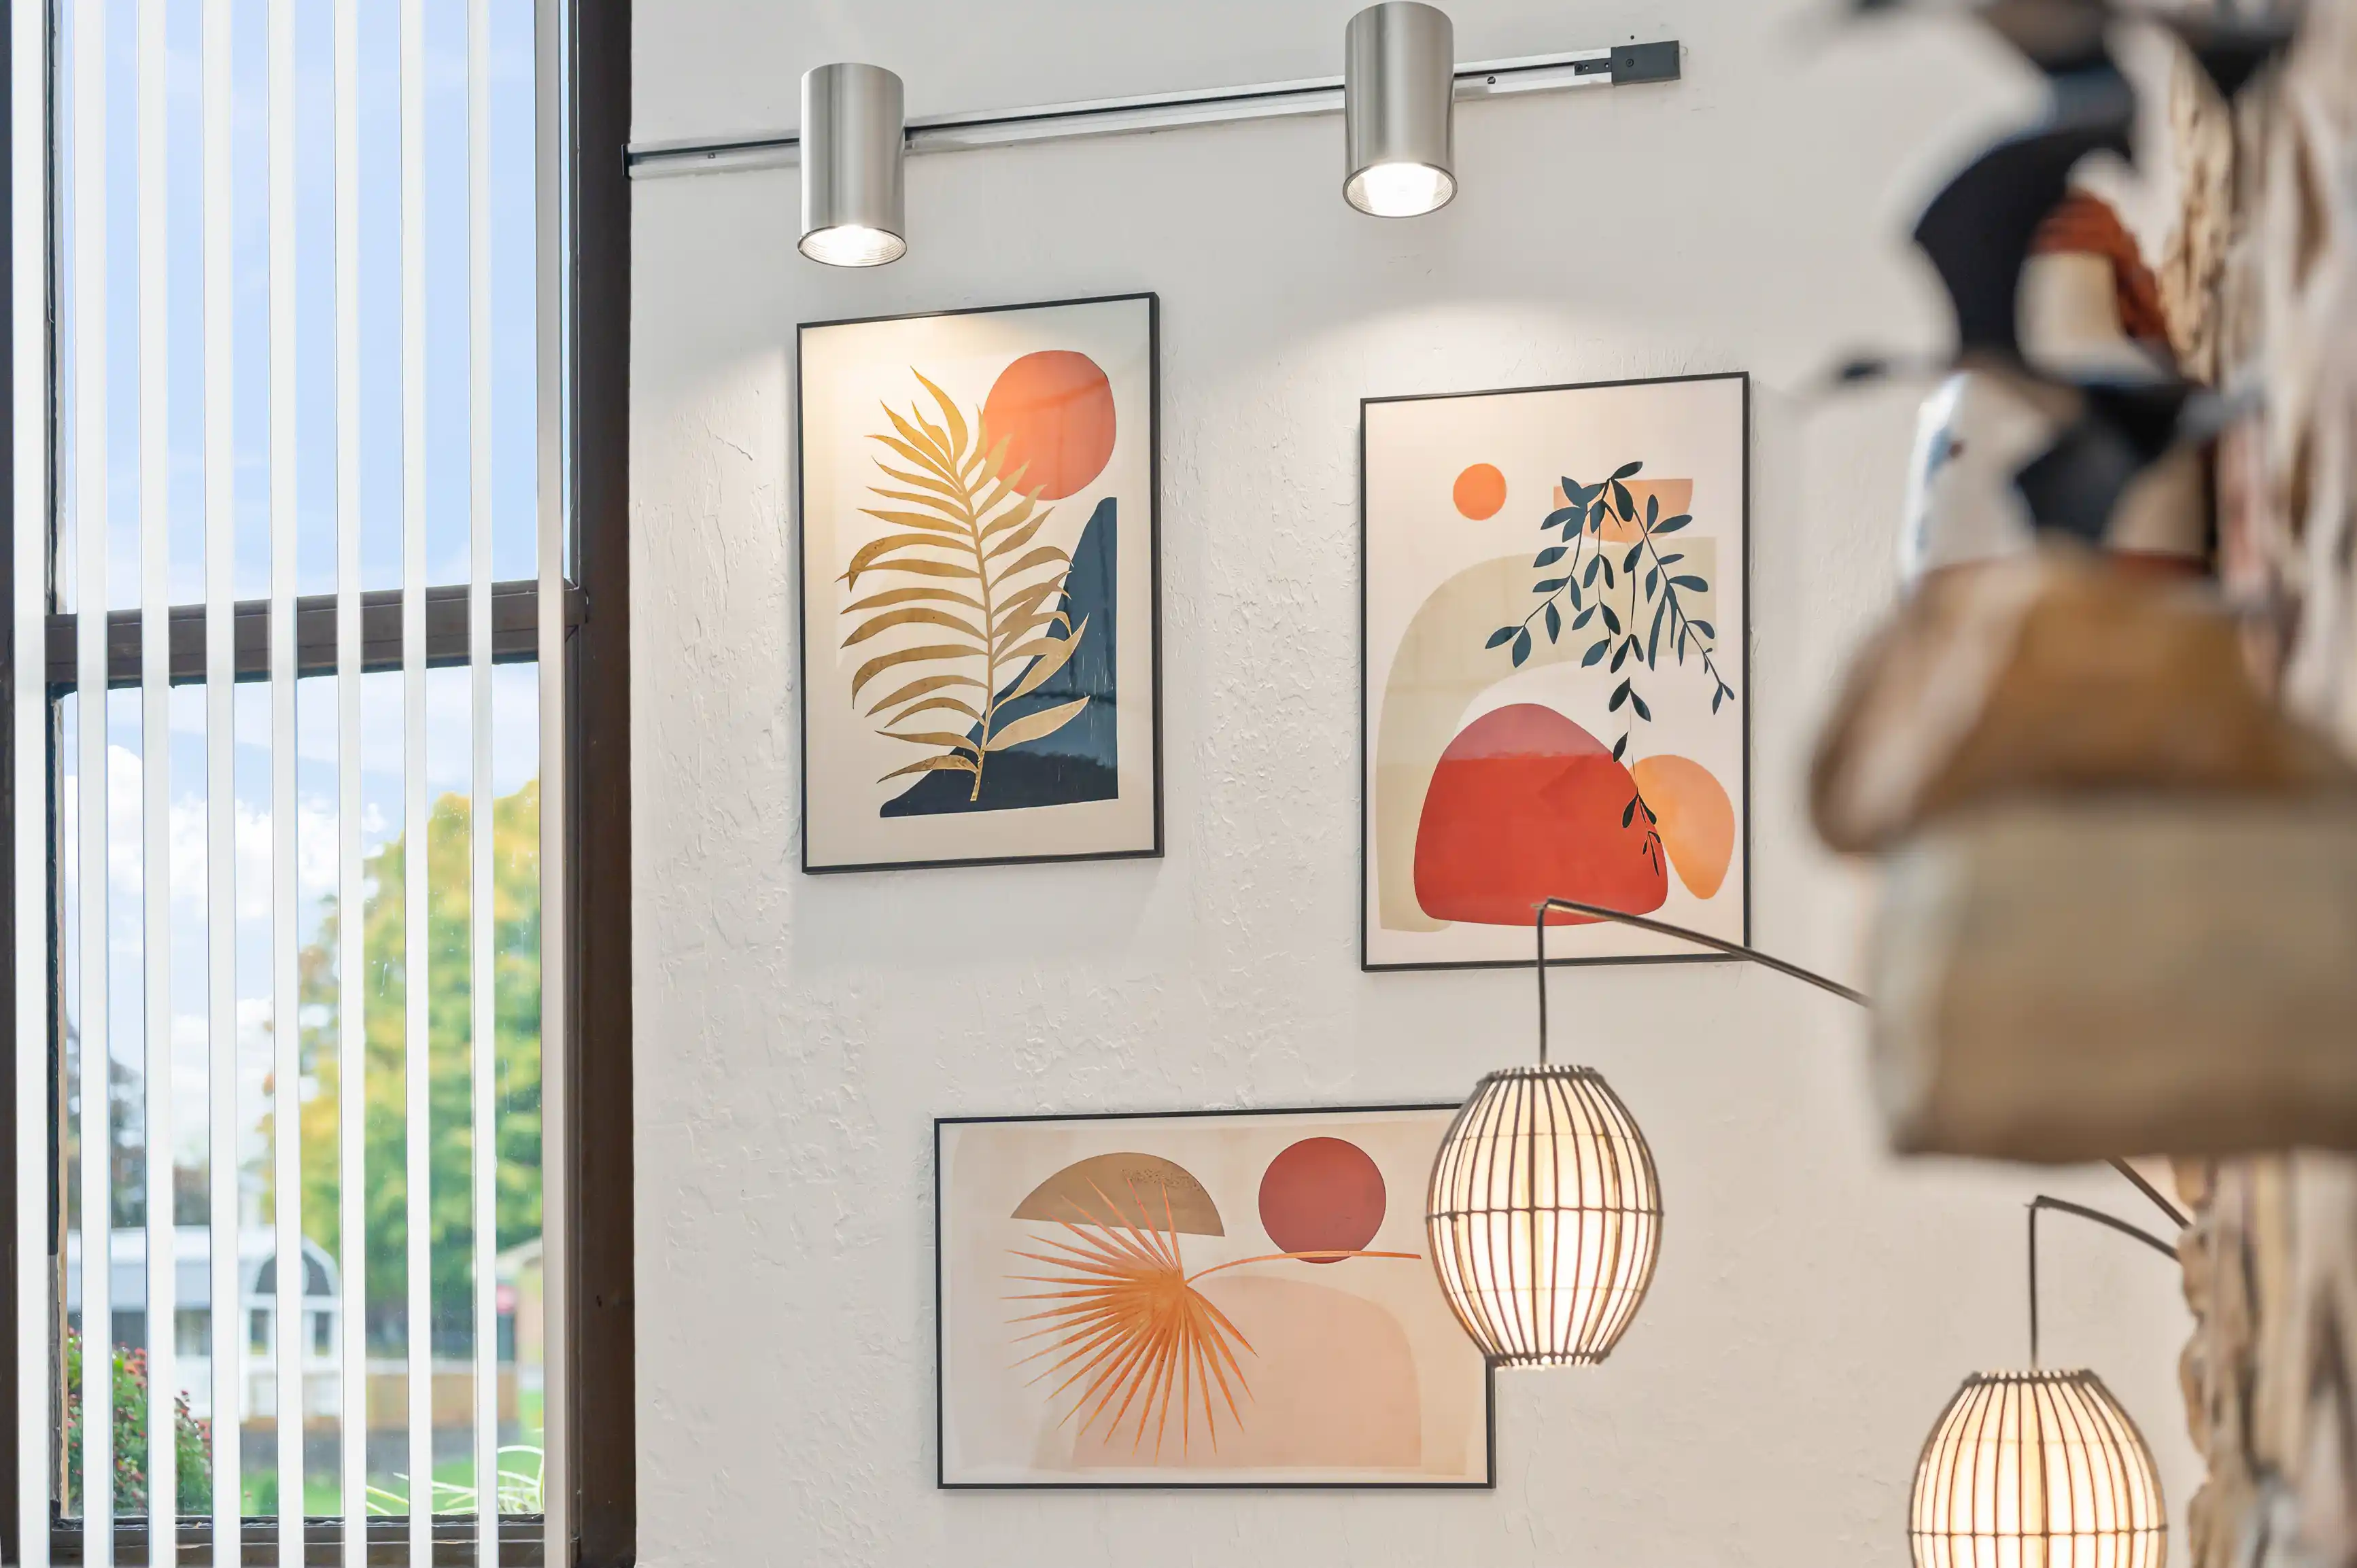 Modern artwork on a gallery wall with stylish hanging lamps in an interior setting.